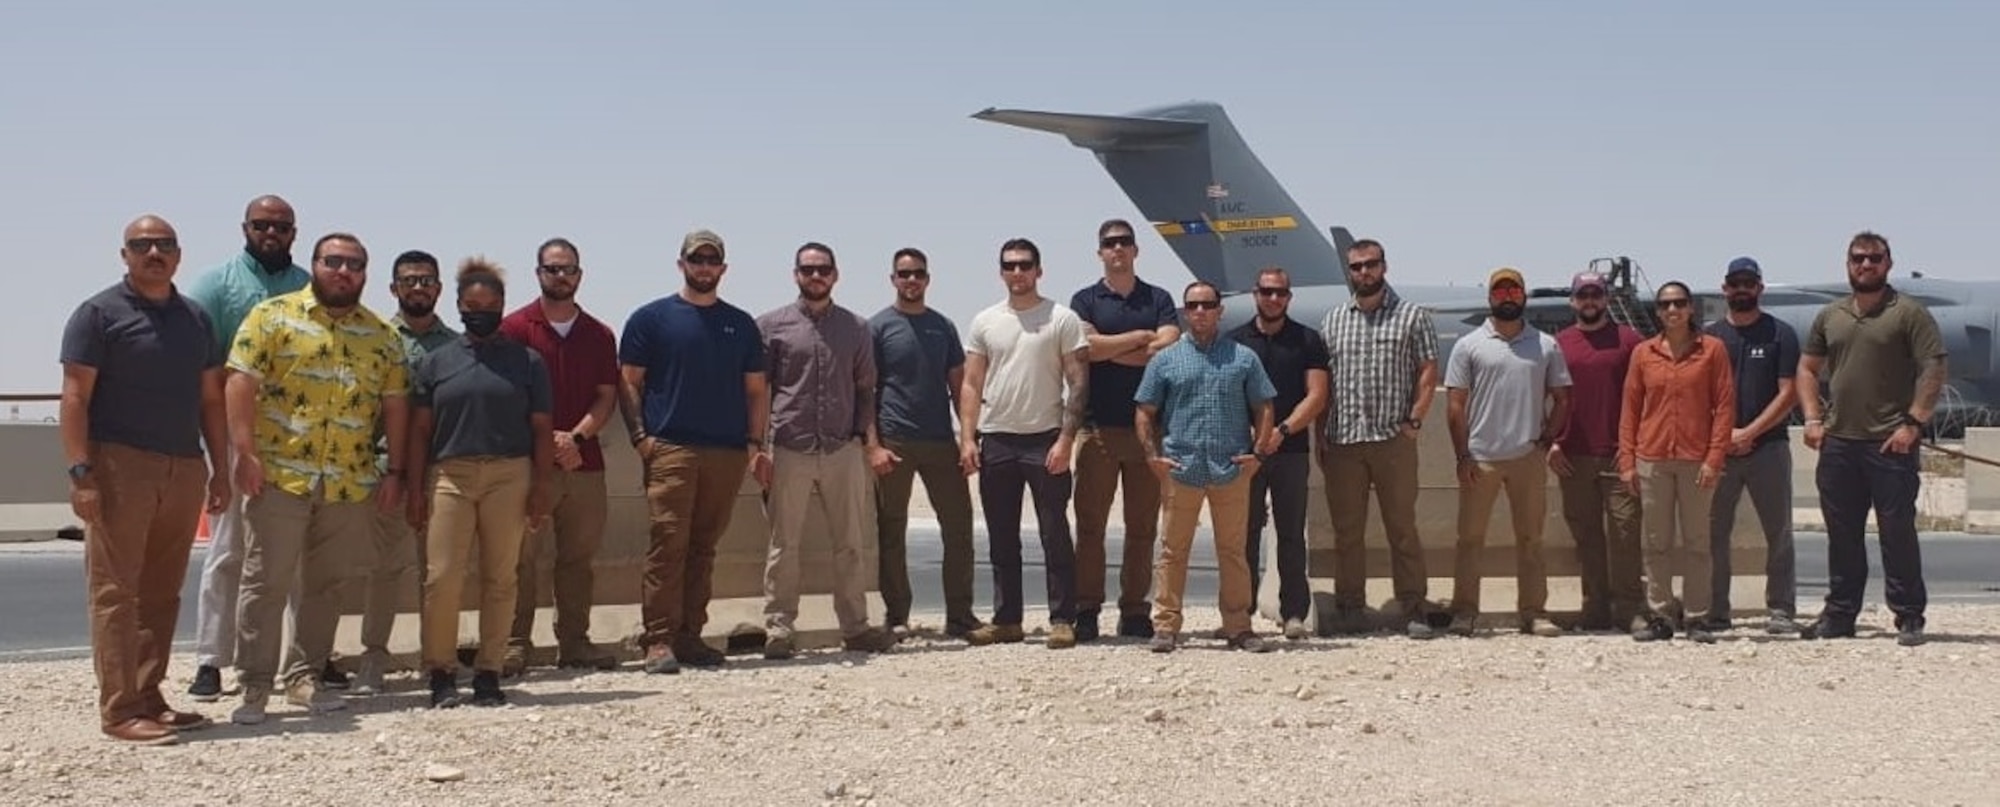 Members of the Office of Special Investigations 2nd Field Investigations Region's 24th Expeditionary Field Investigations Squadron/Detachment 241 Screening Team assembled at Al Udeid Air Base, Qatar, to support Operation Allies Refuge. (Photo submitted by 2 FIR)